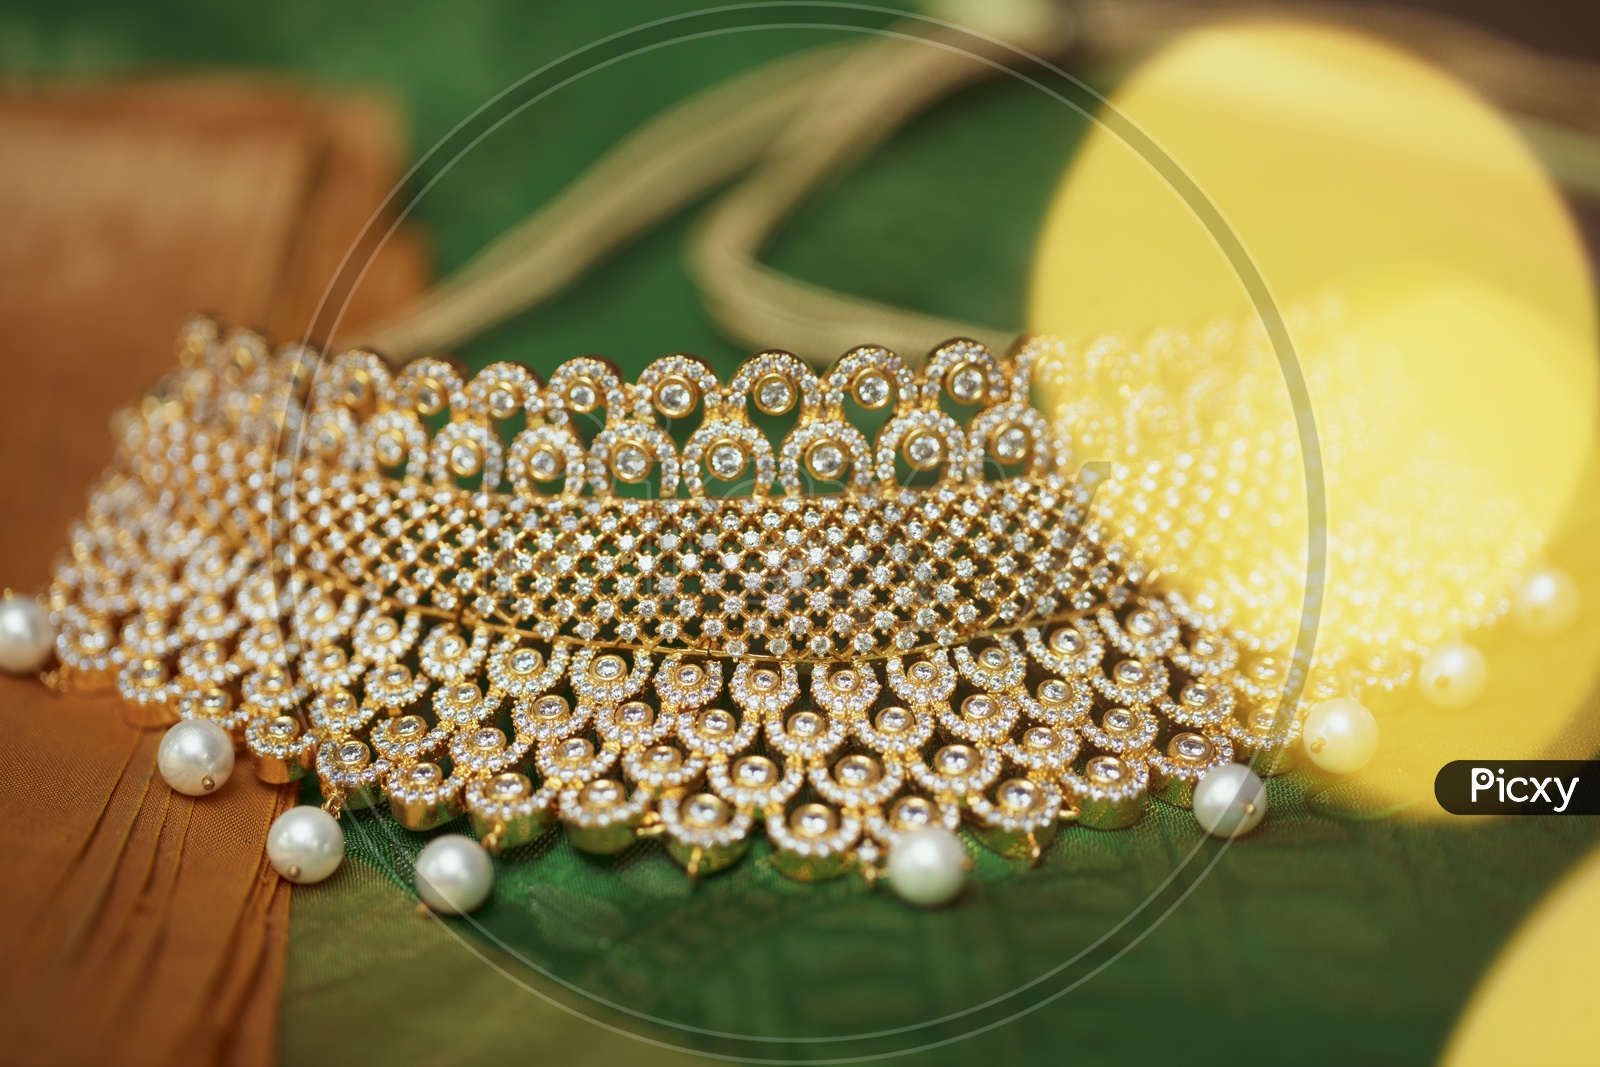 Choker Necklace In Green background - Indian Jewelry/Gold Ornament with White Pearls - Close up